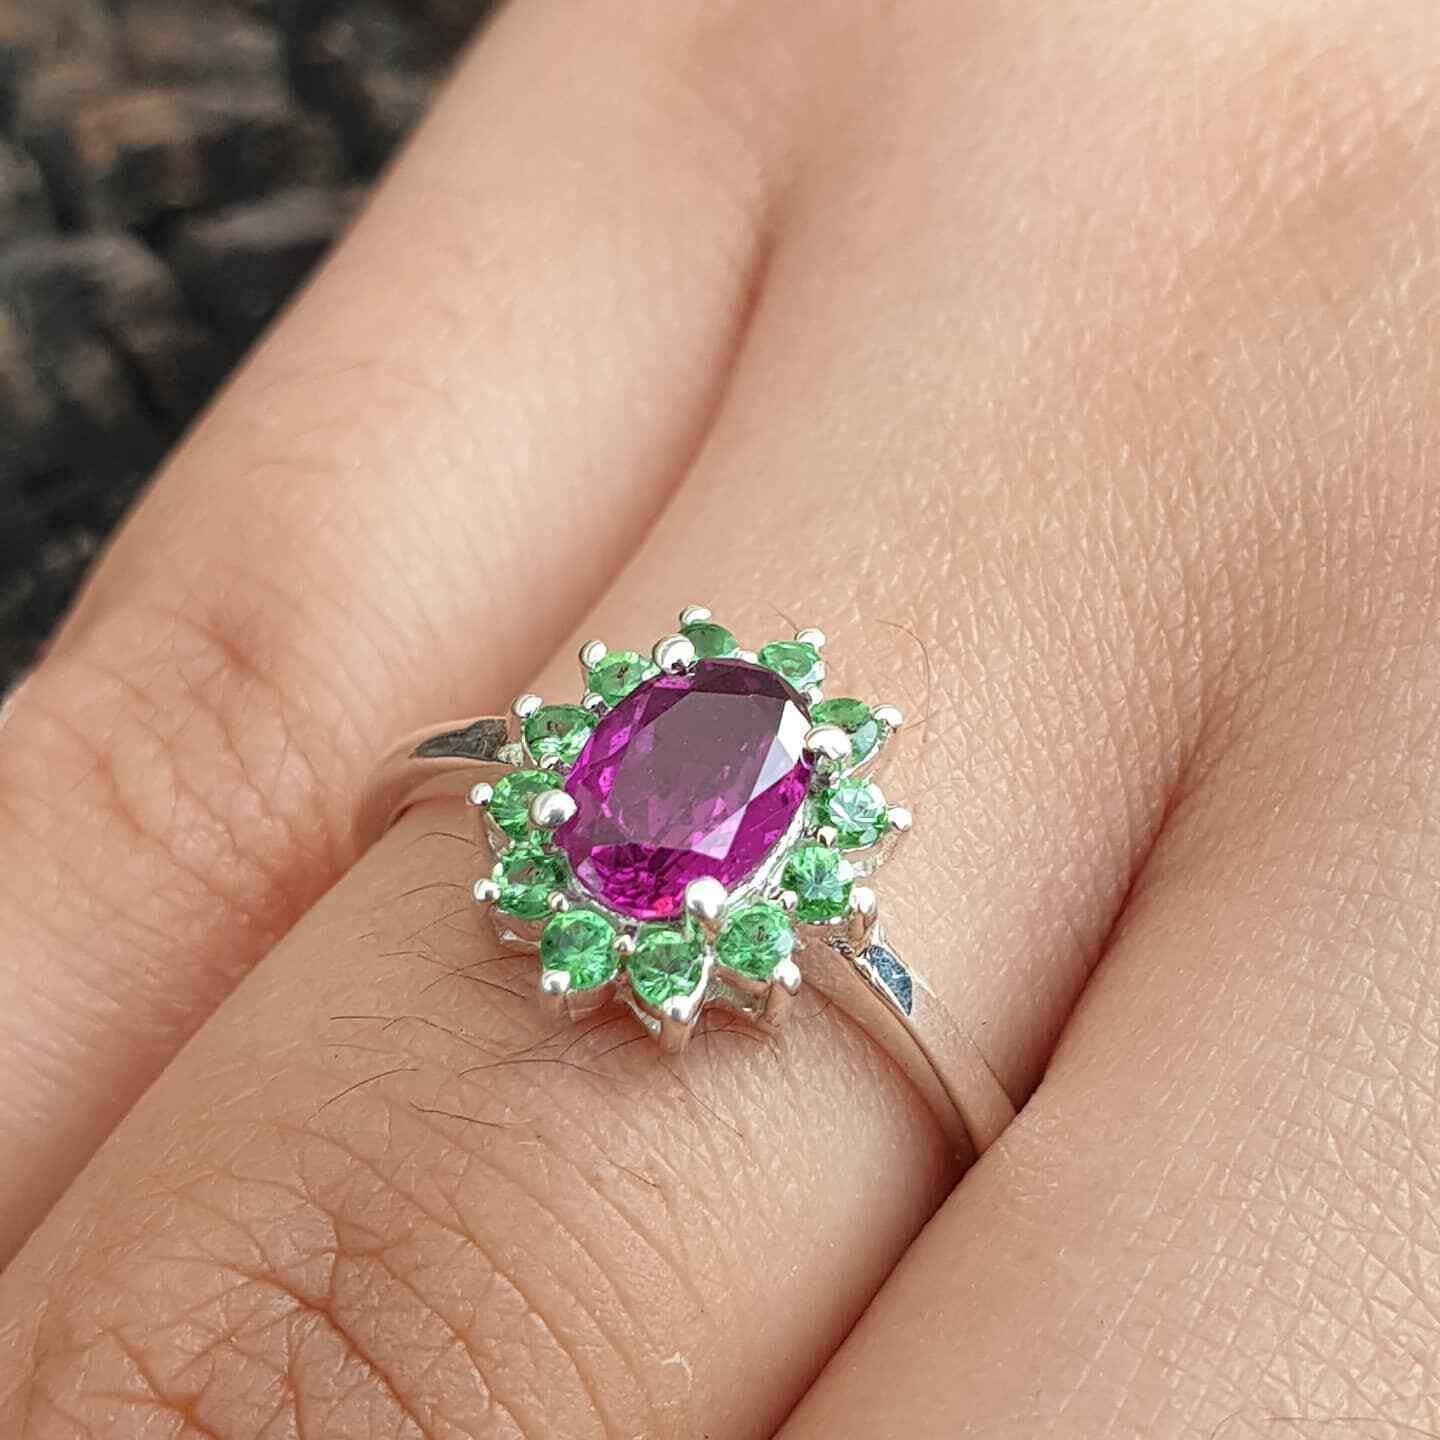 Purple Garnet Cluster Ring Sterling Sliver Ring For Birthday/Anniversary Gift.
Style
Cluster
Secondary Stone
Tsavorite Garnet
Main Stone Color
Purple
Ring Shape
Round
Metal Purity
925 parts per 1000
Main Stone
purple